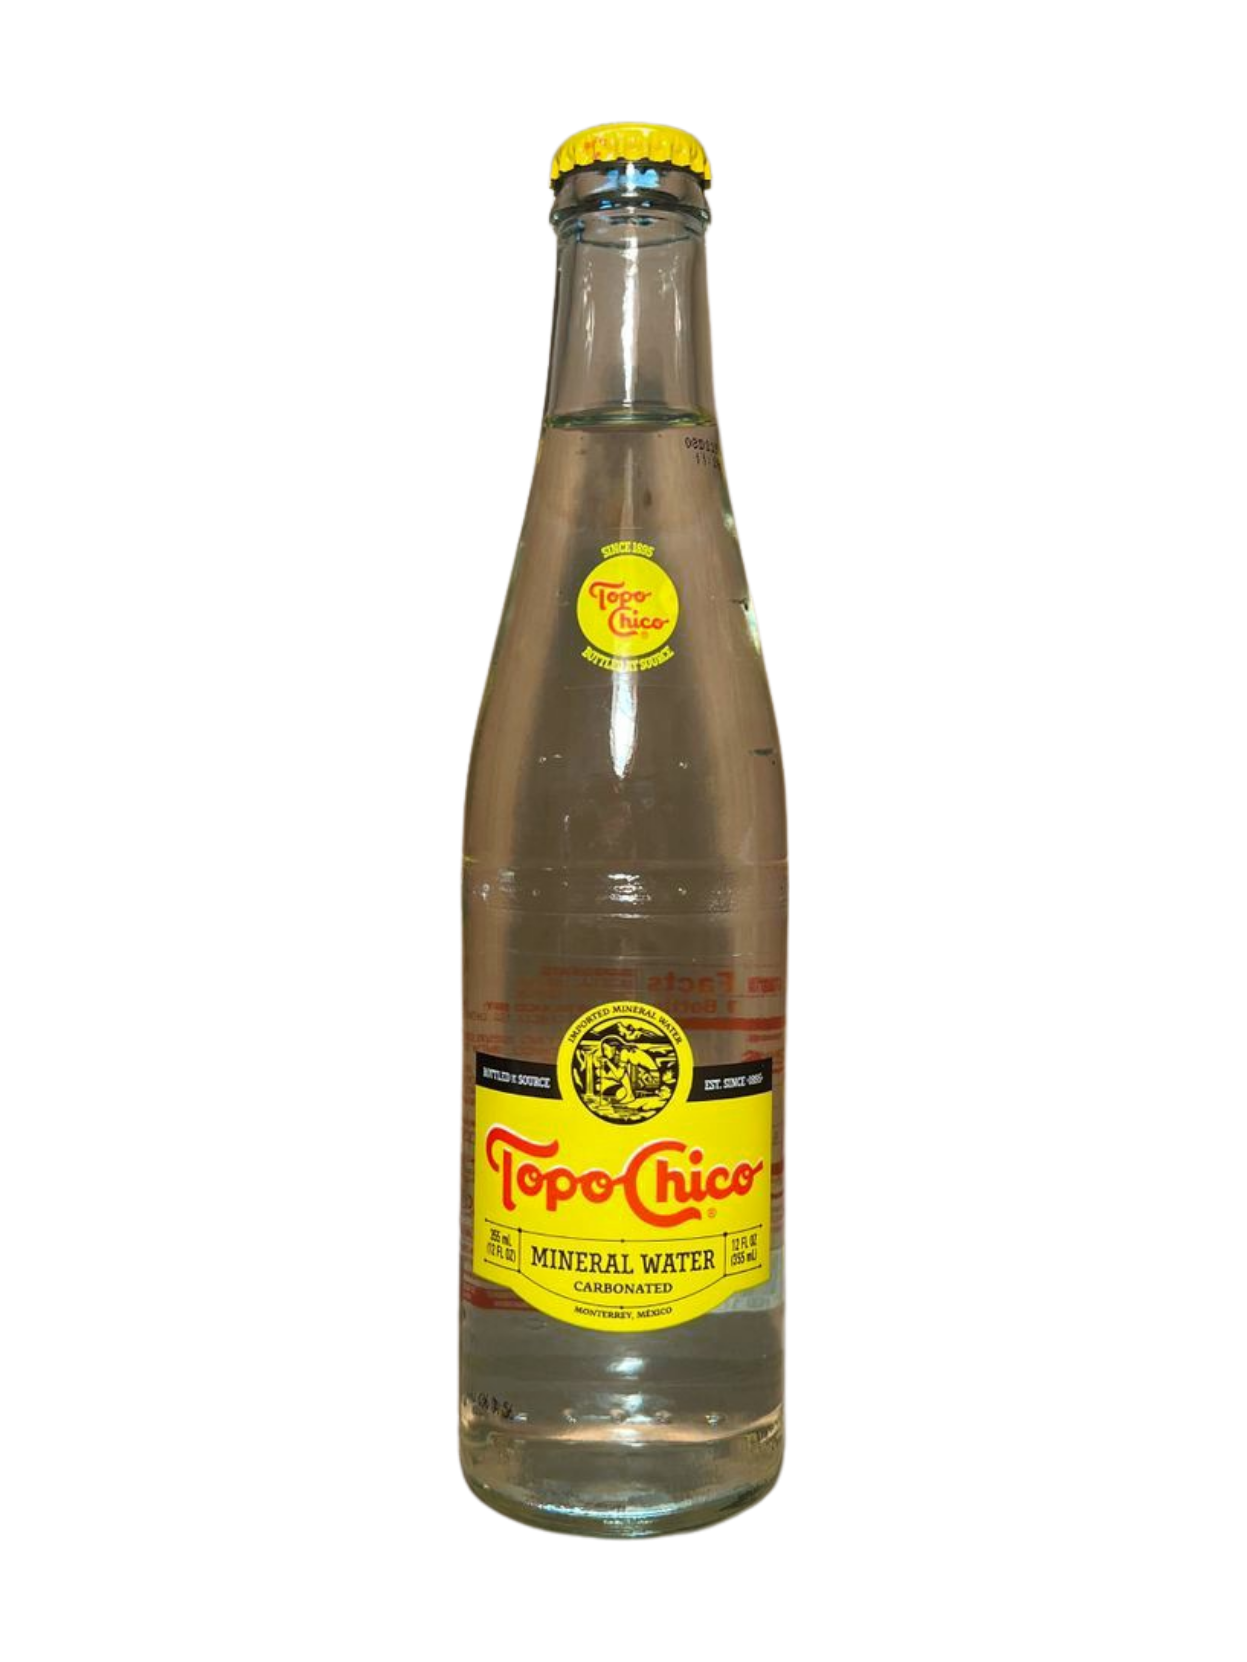 Topo Chico Mineral Water Glass Bottles, 12 fl oz, 4 Pack